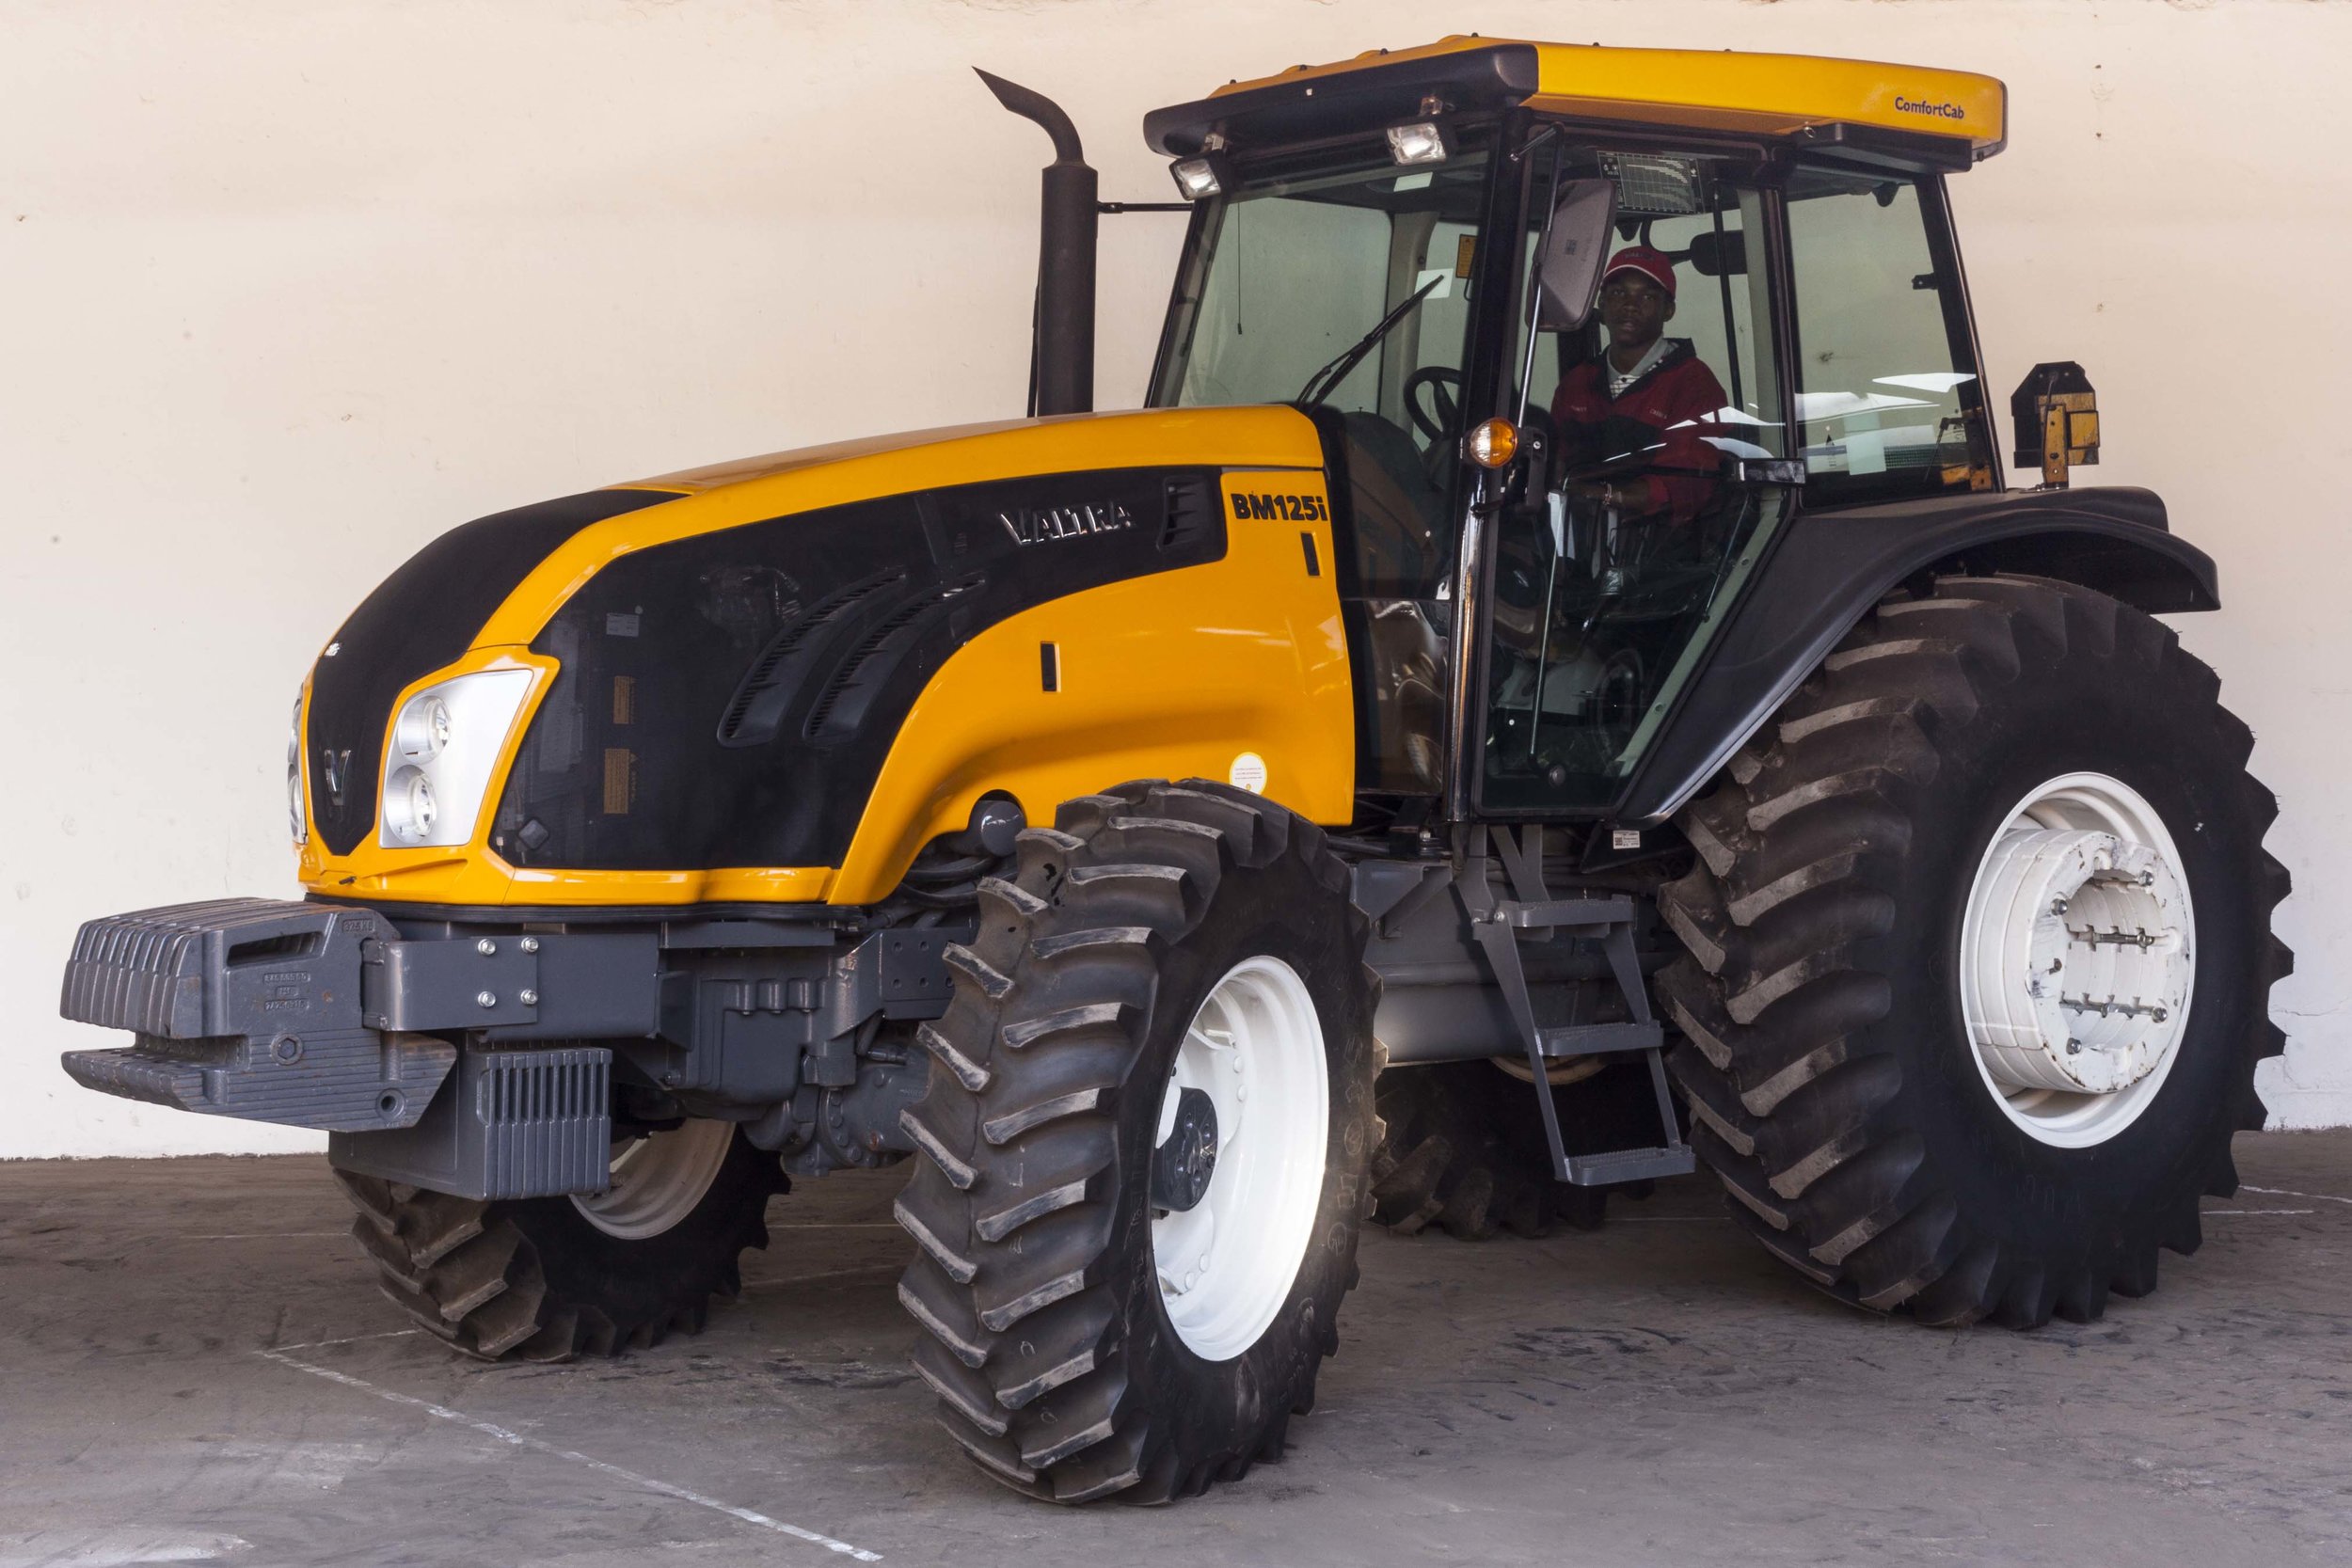  VALTRA  BM125i  4wd …  135 HP   WITH AIR-CONDITIONED CAB 